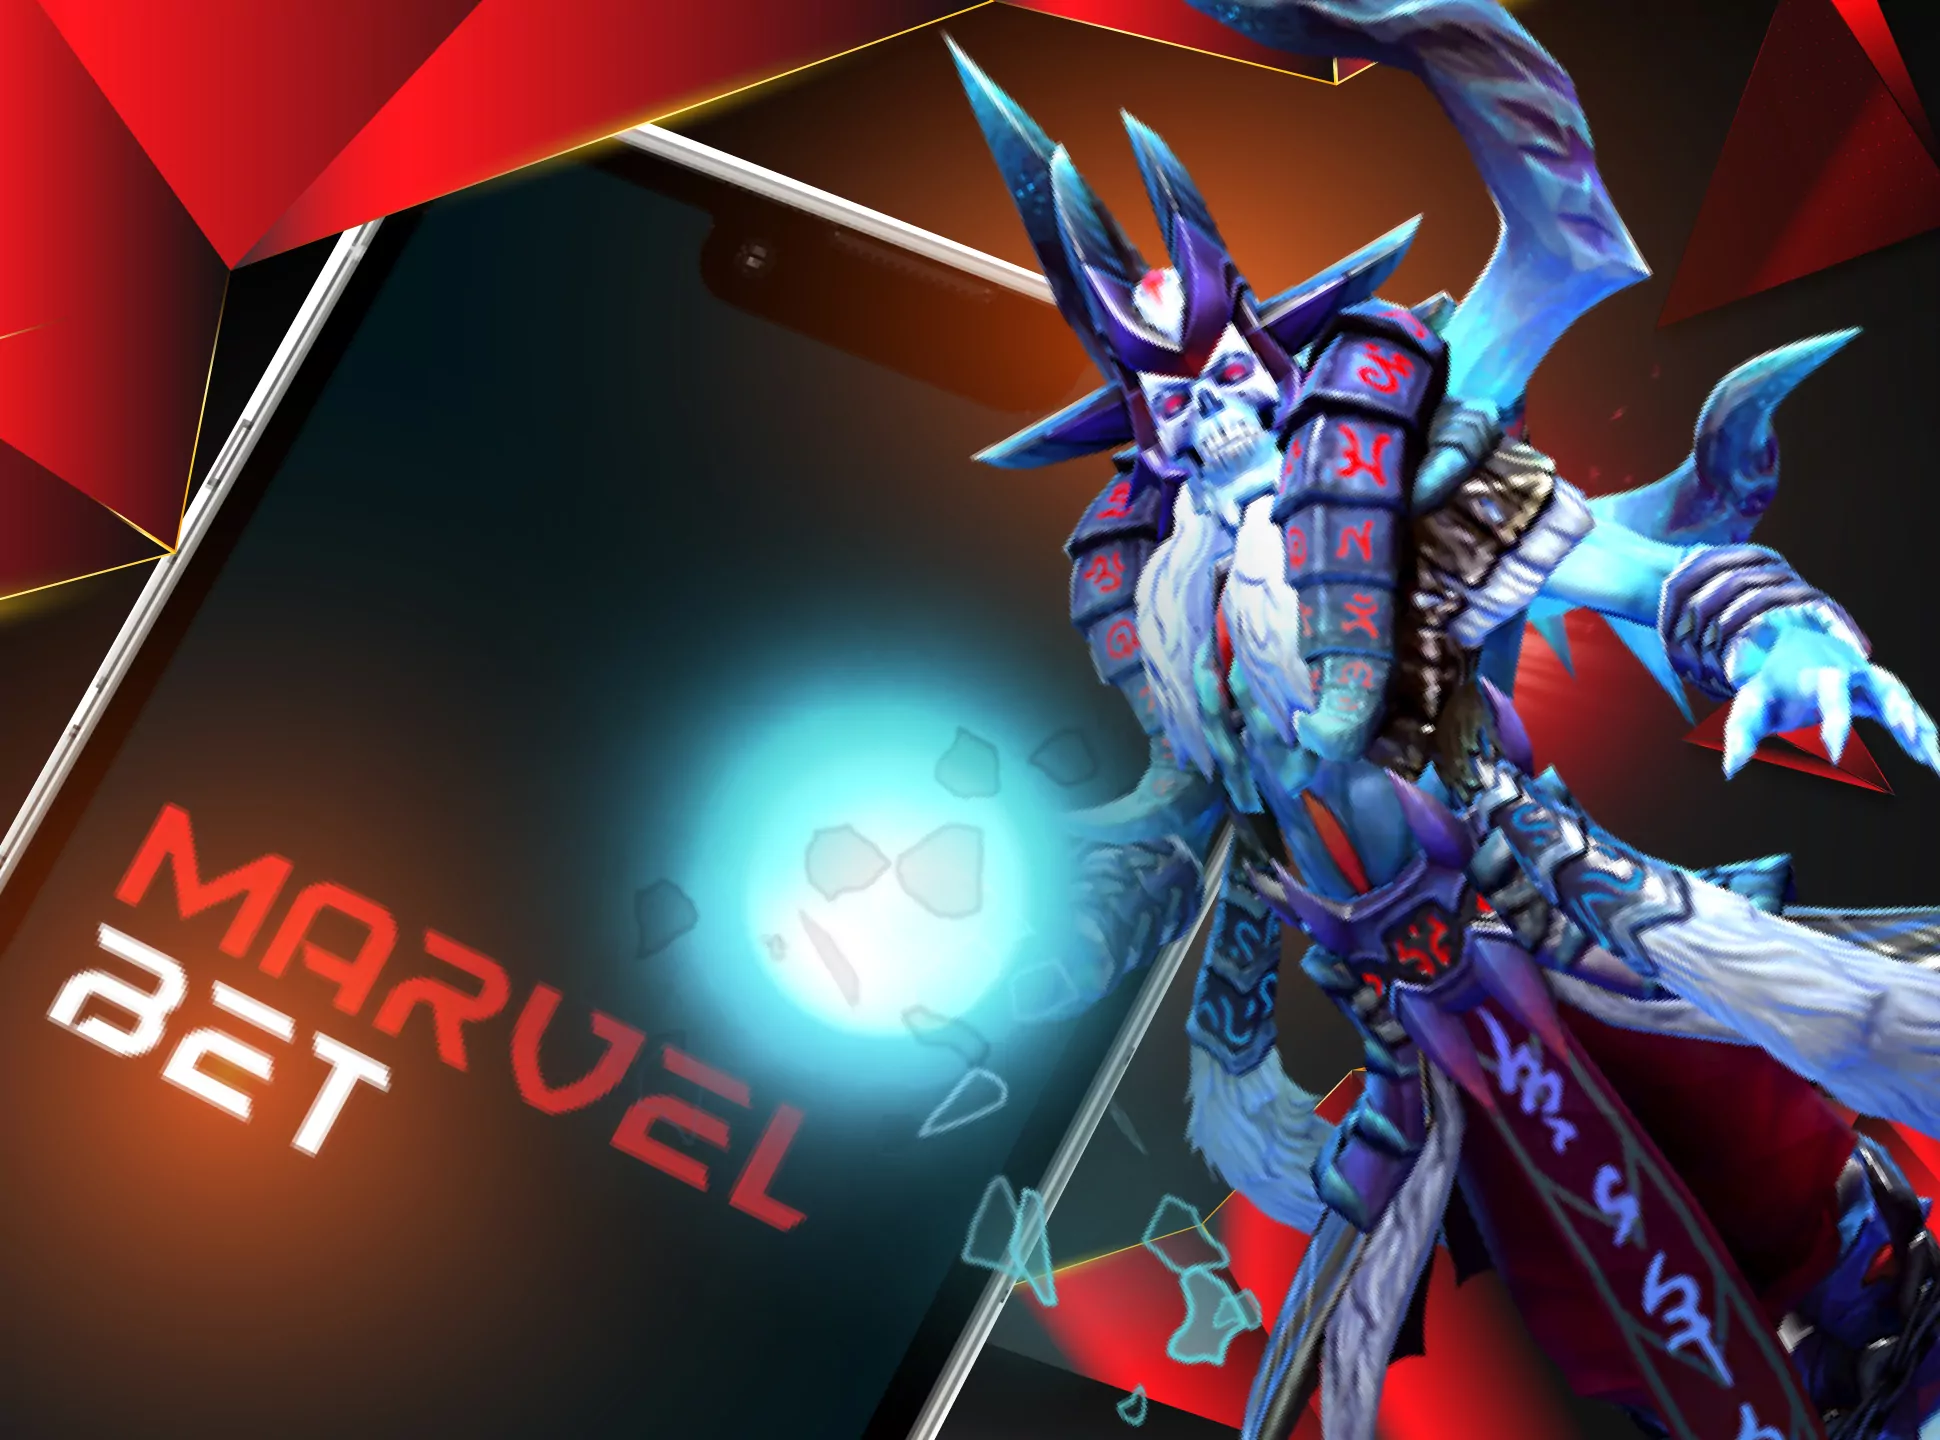 Bet on the Dota 2 events in the Marvelebt mobile app.